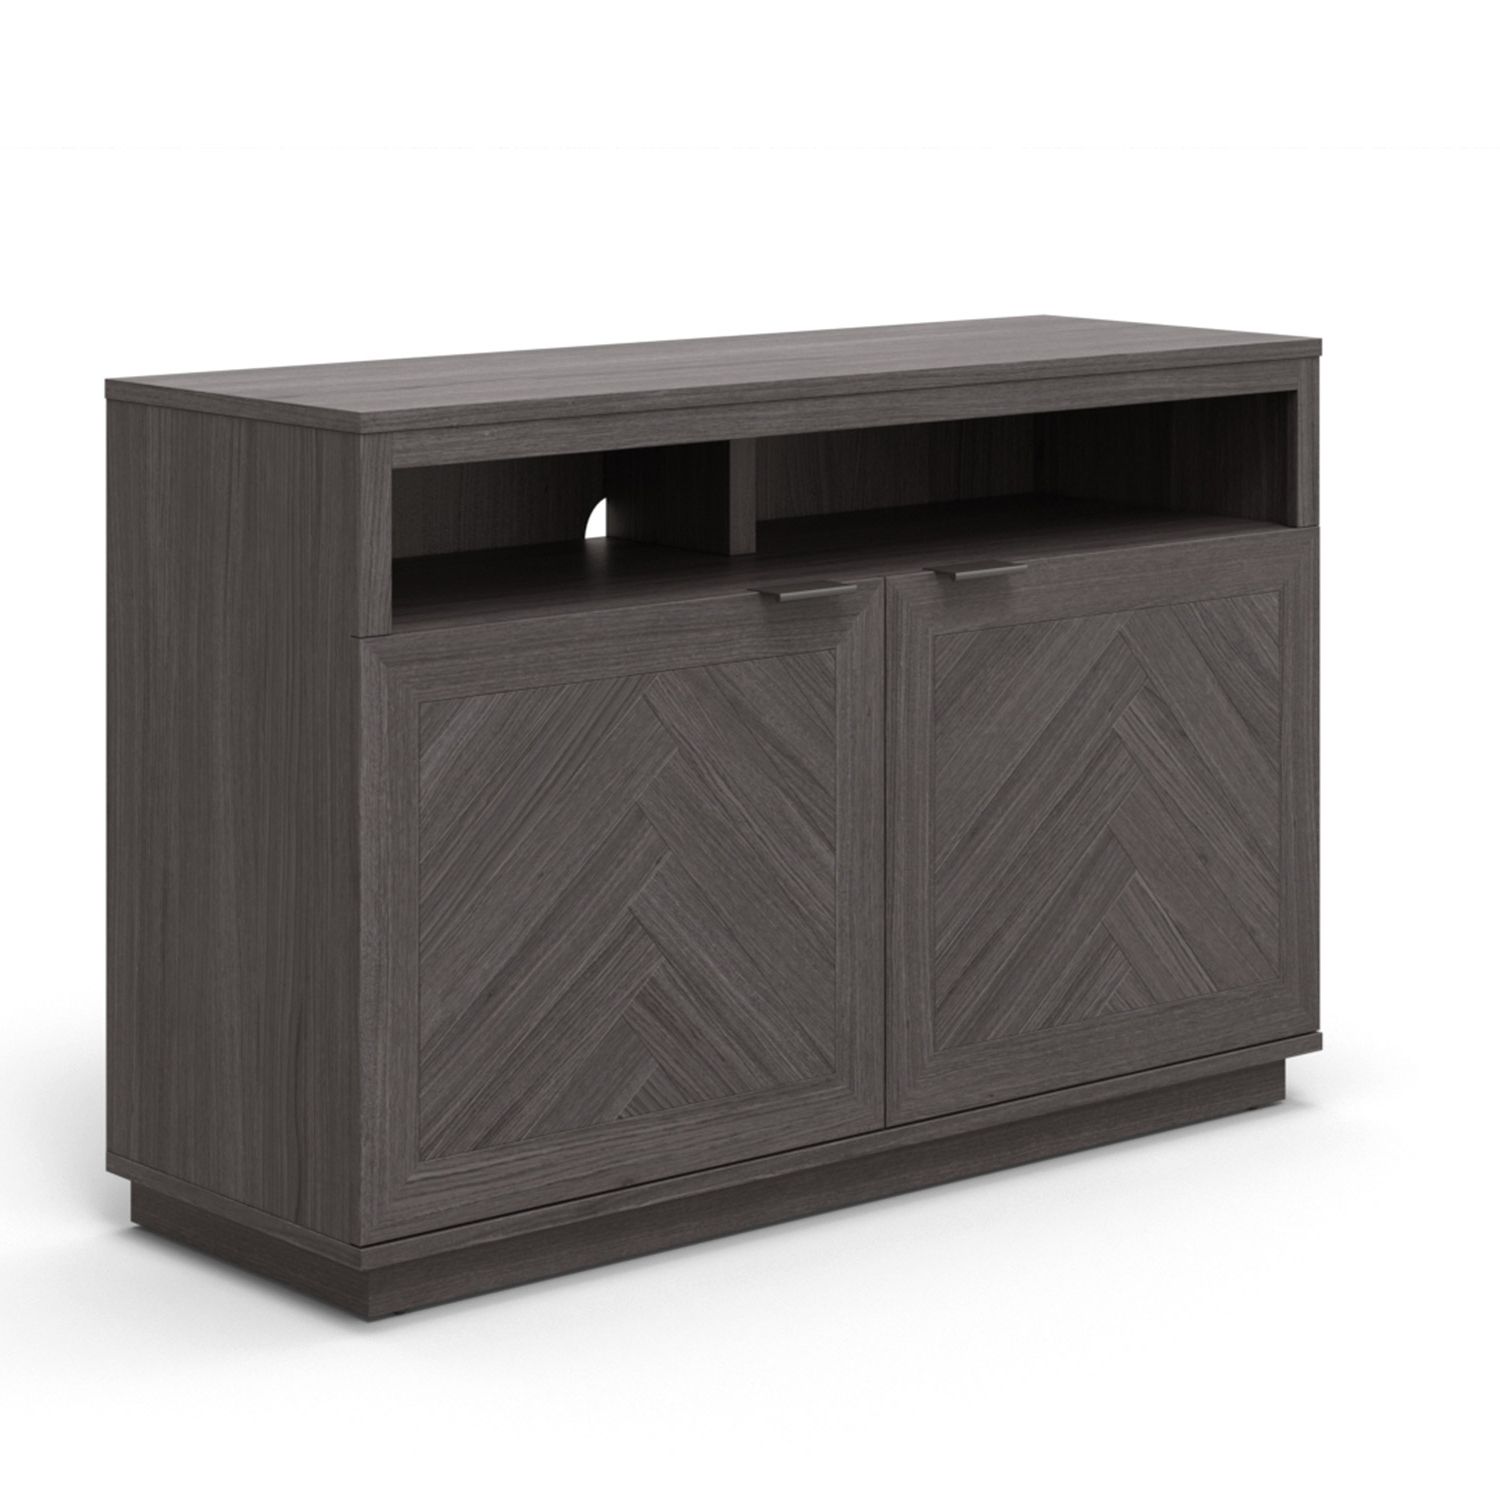 Whalen Within Well Liked Farmhouse Tv Stands For 75" Flat Screen With Console Table Storage Cabinet (View 10 of 10)